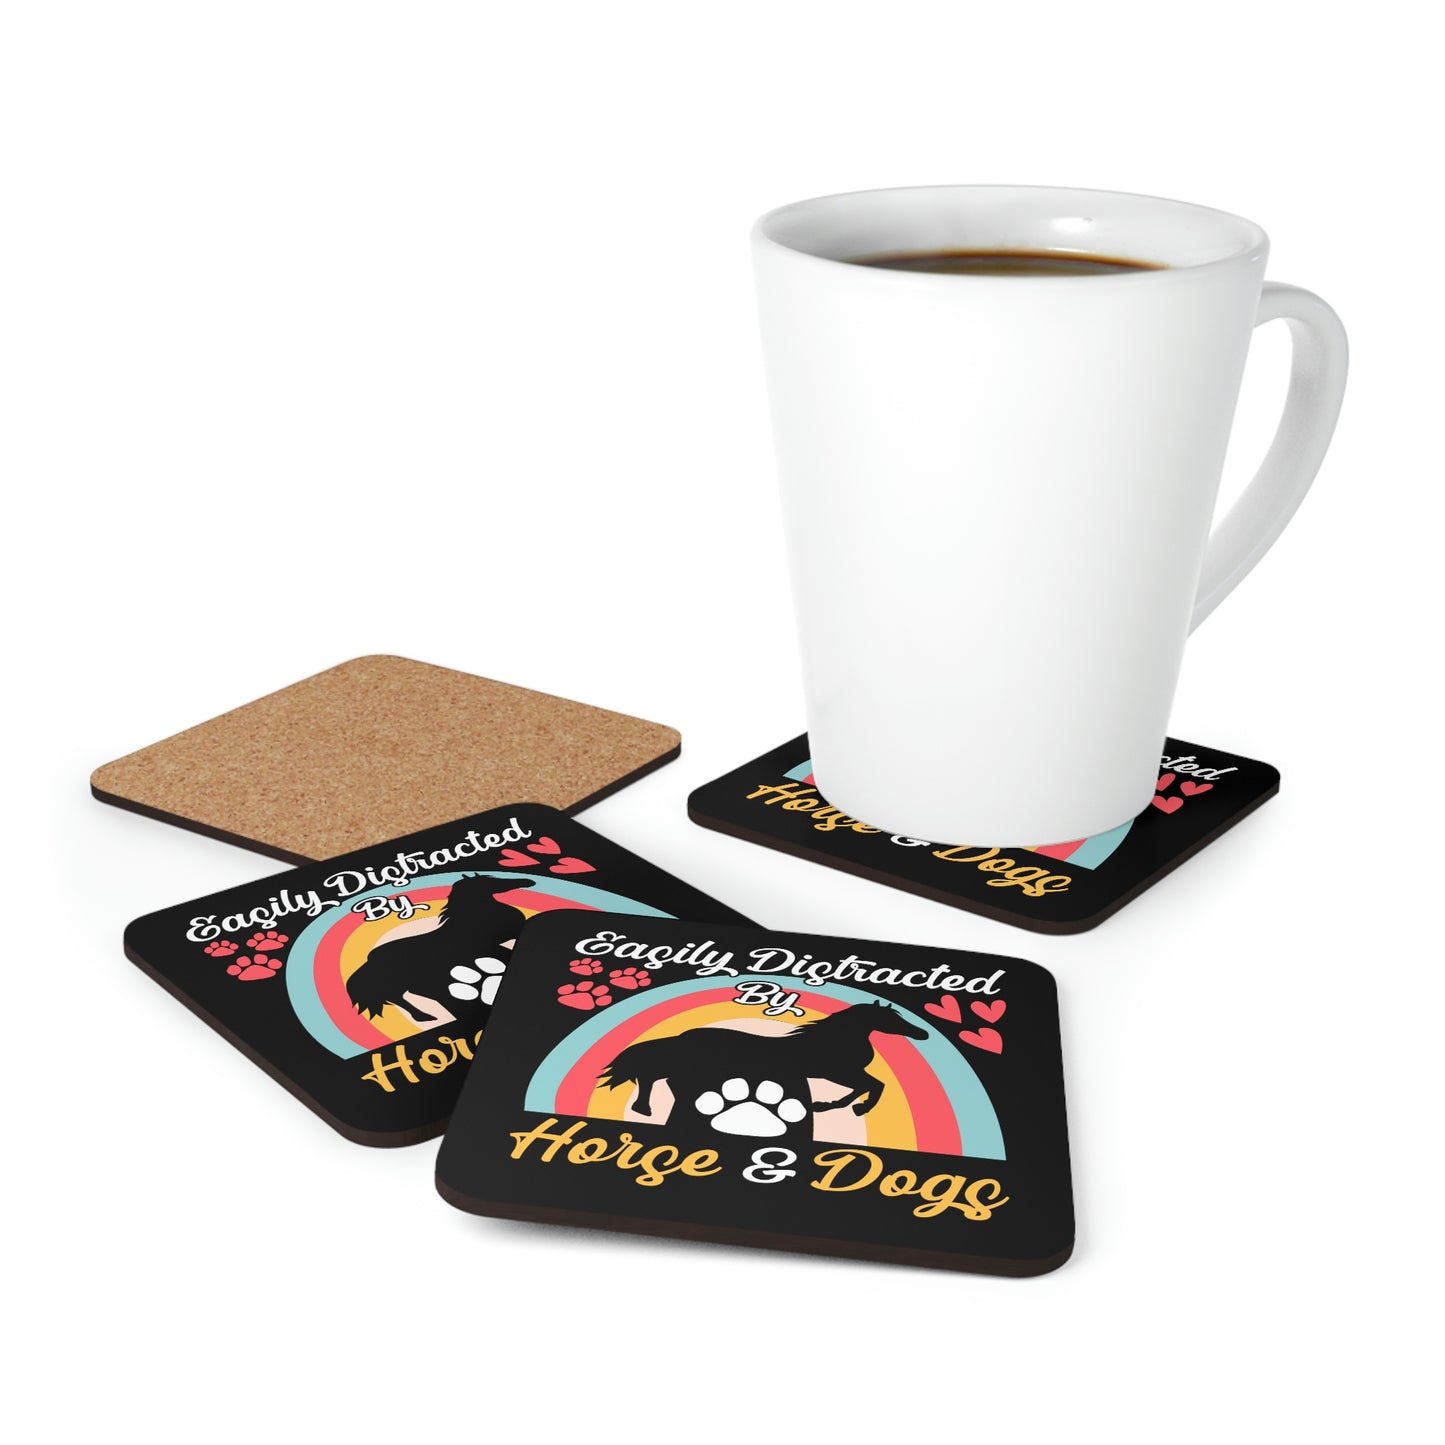 Easily Distracted by Horse & Dogs Corkwood Coaster Set